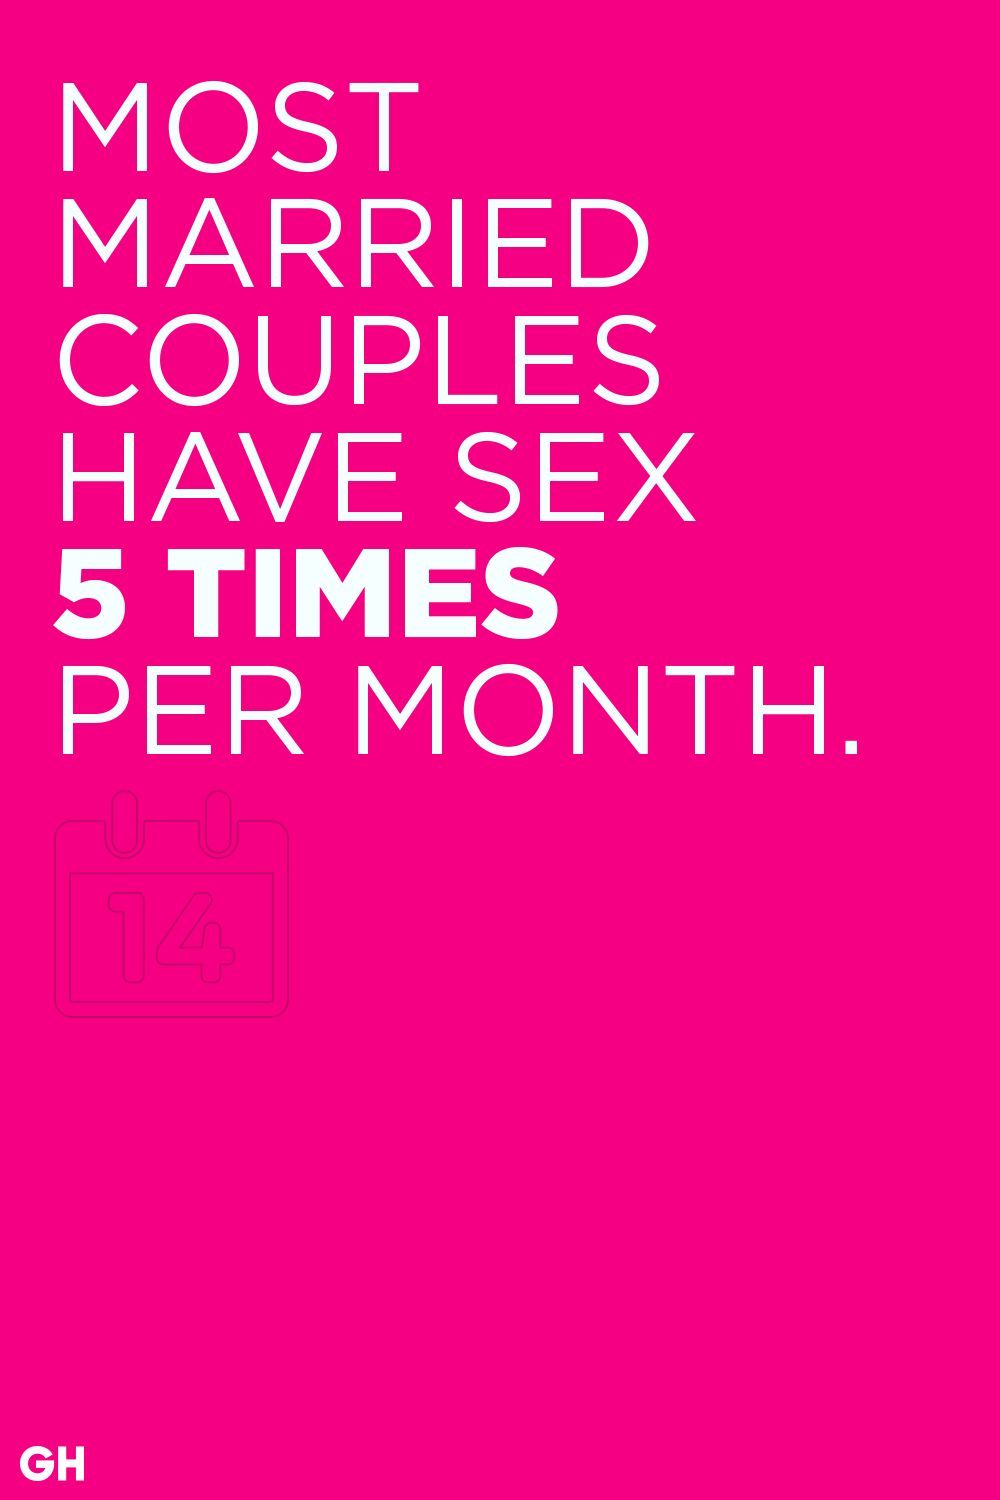 sex statistics for married couples